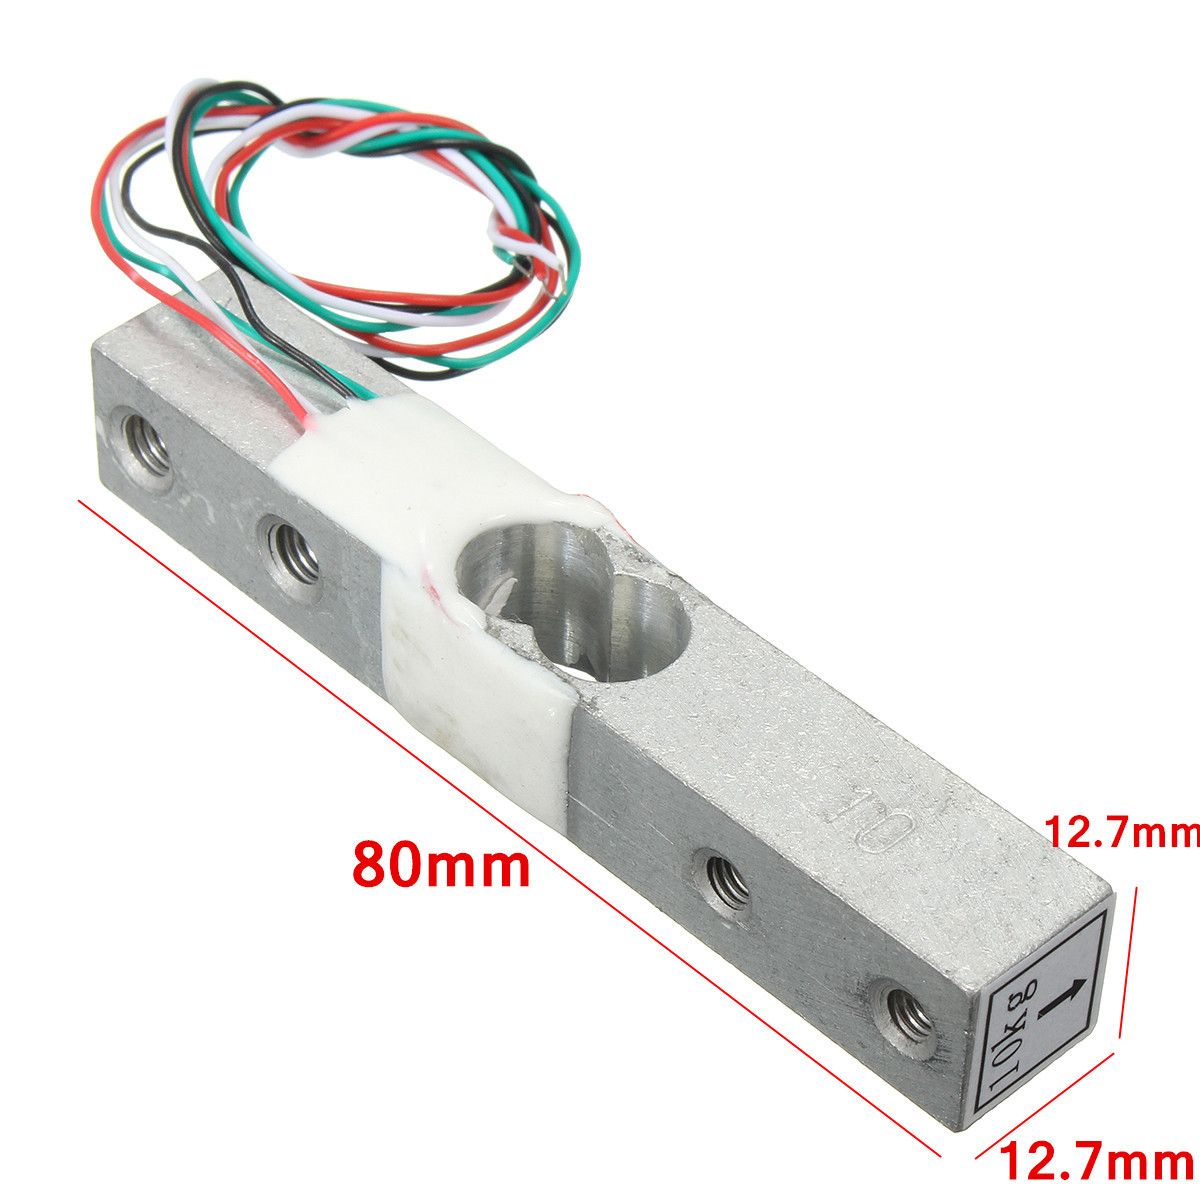 10kg-Aluminum-Alloy-Small-Scale-Weighing-Pressure-Sensor-With-HX711-AD-Module-1129369